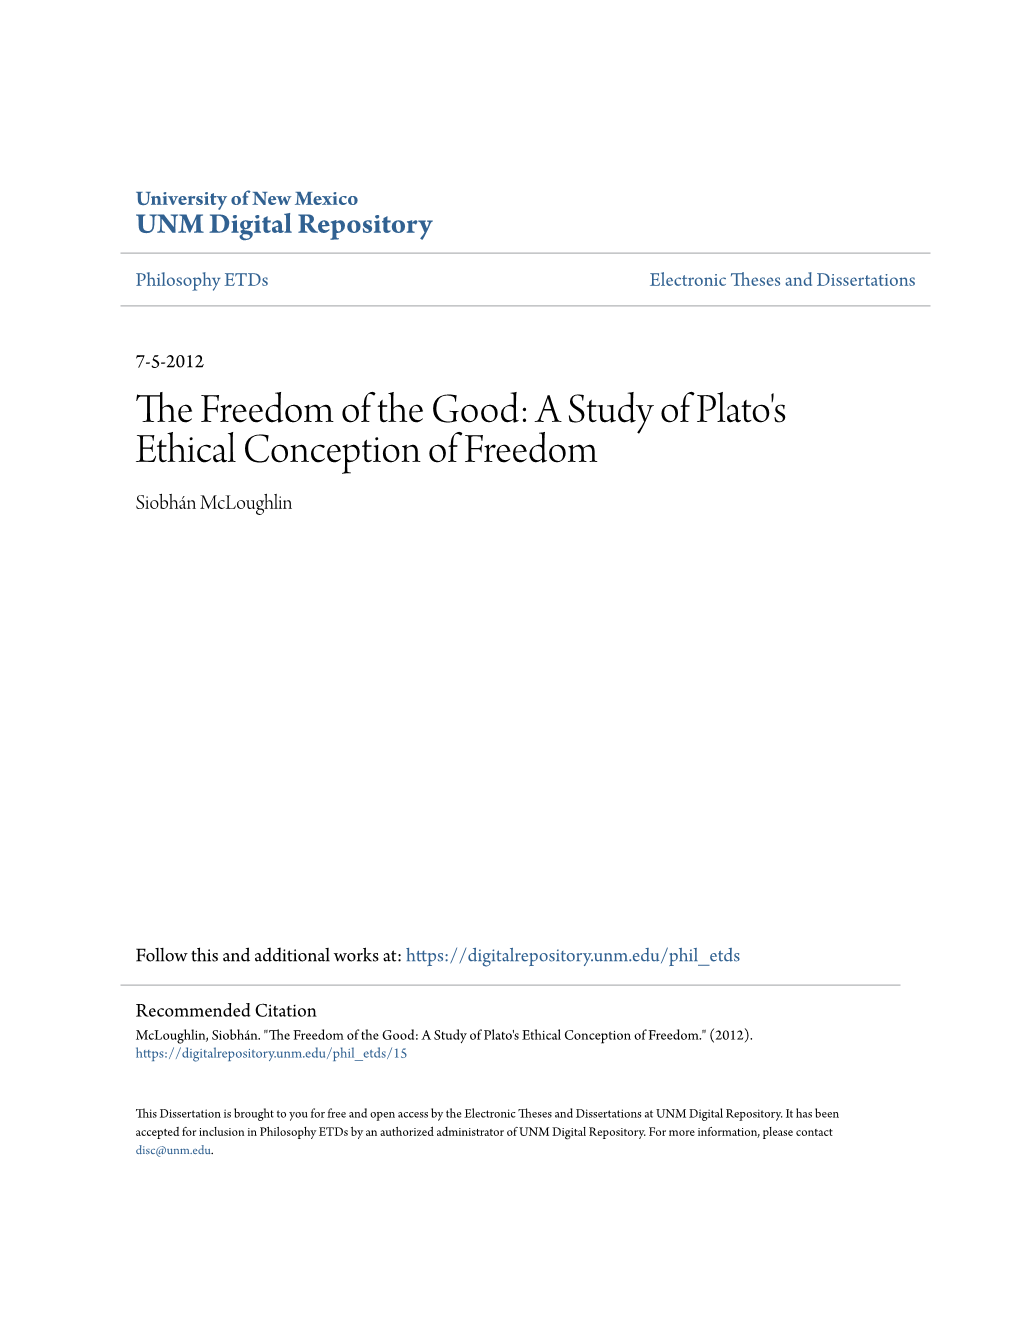 The Freedom of the Good: a Study of Plato's Ethical Conception of Freedom